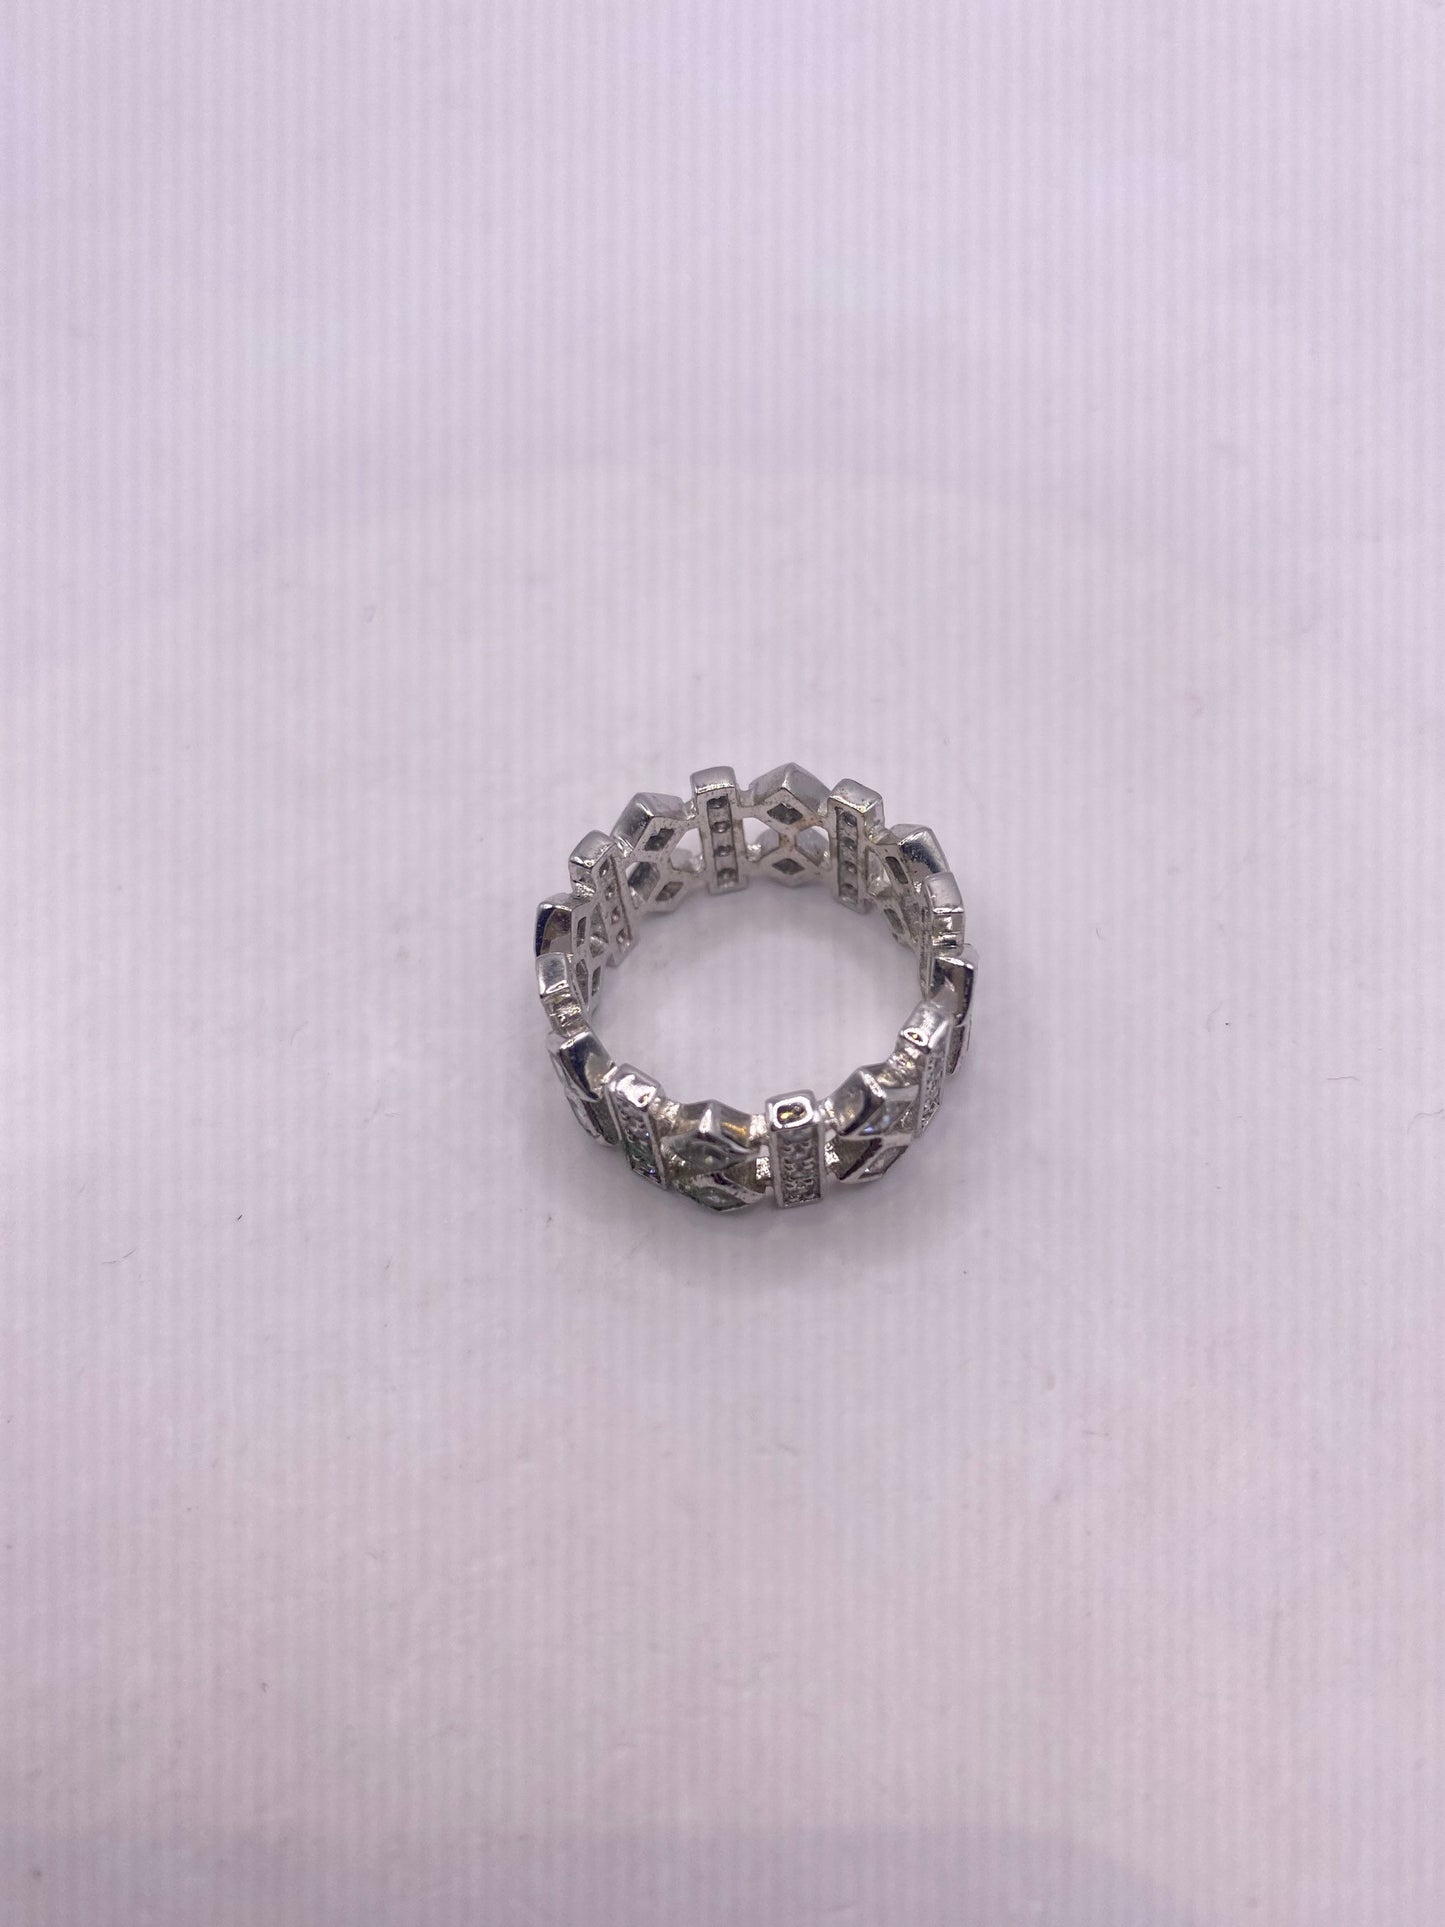 Vintage White Crystal 925 Sterling Silver Wedding Eternity Band Ring